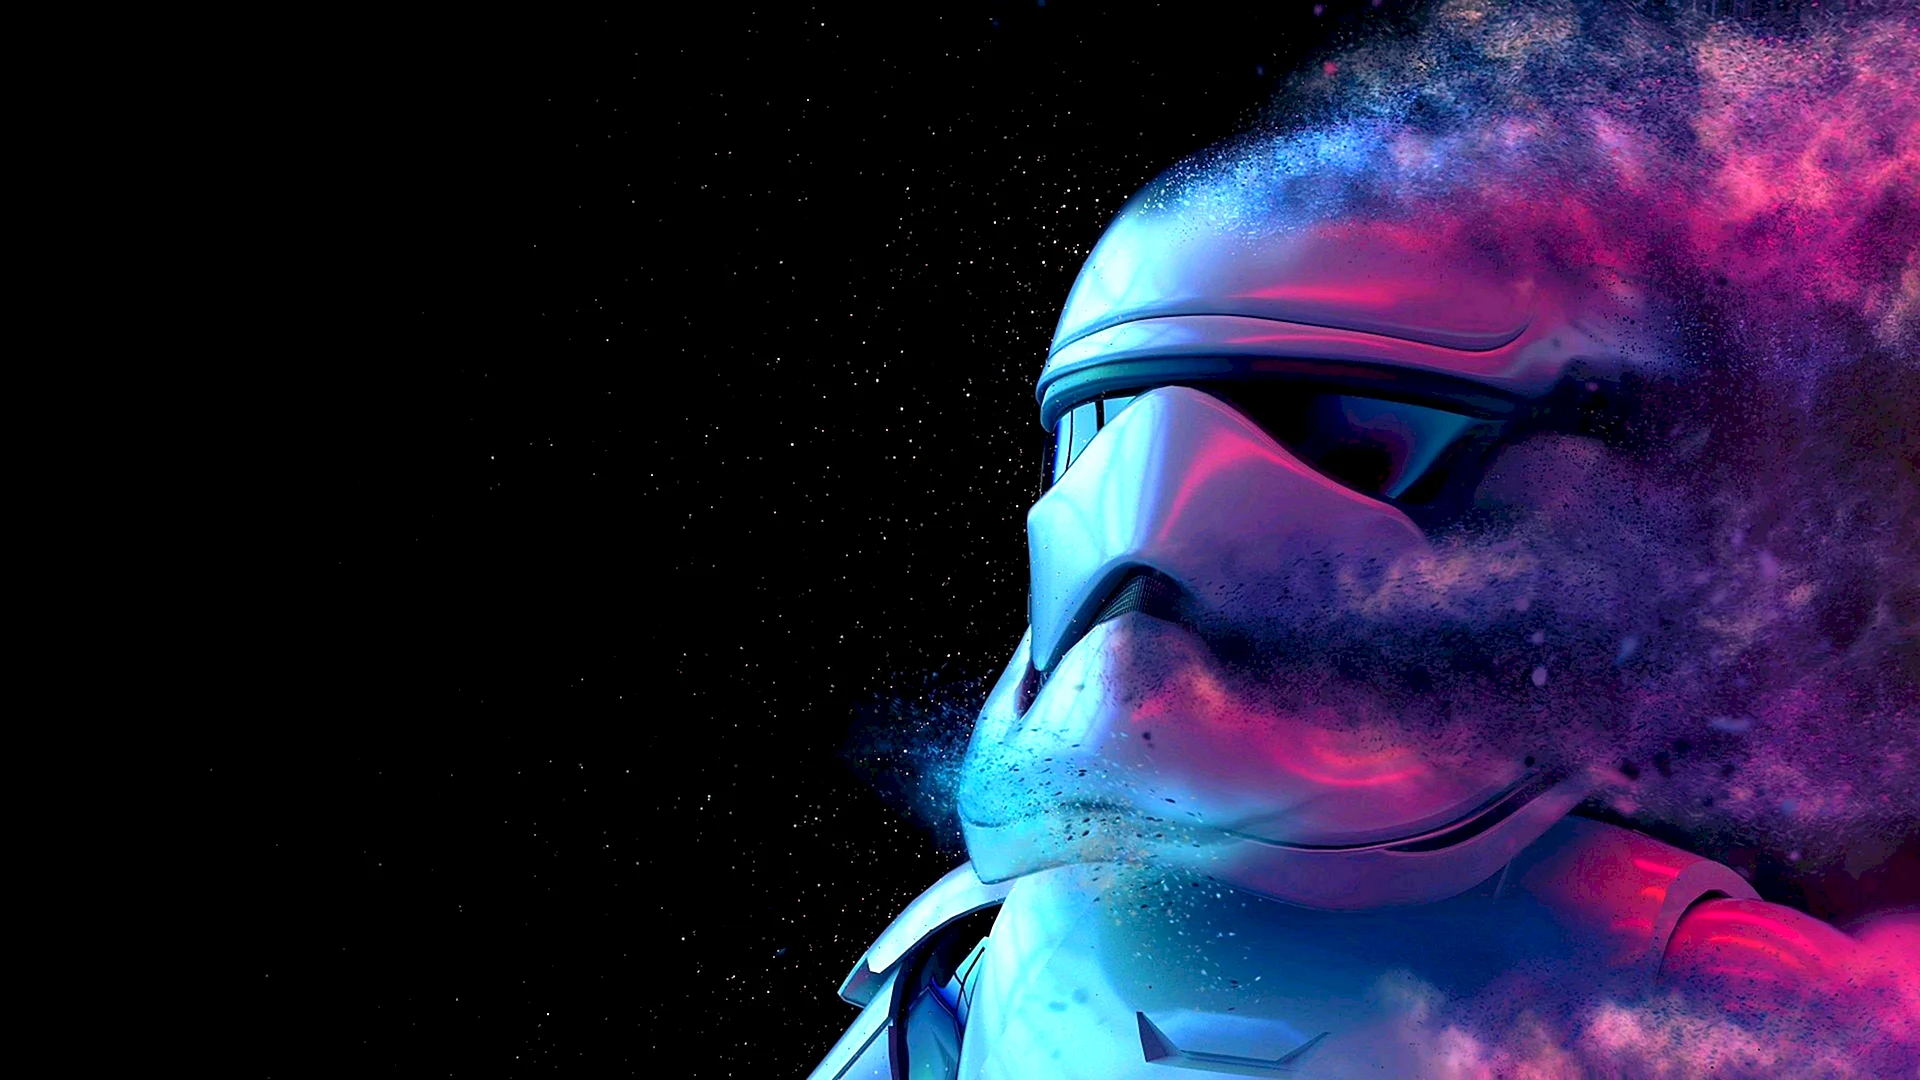 Cool Star Wars Wallpapers - Free Cool Star Wars Backgrounds ...